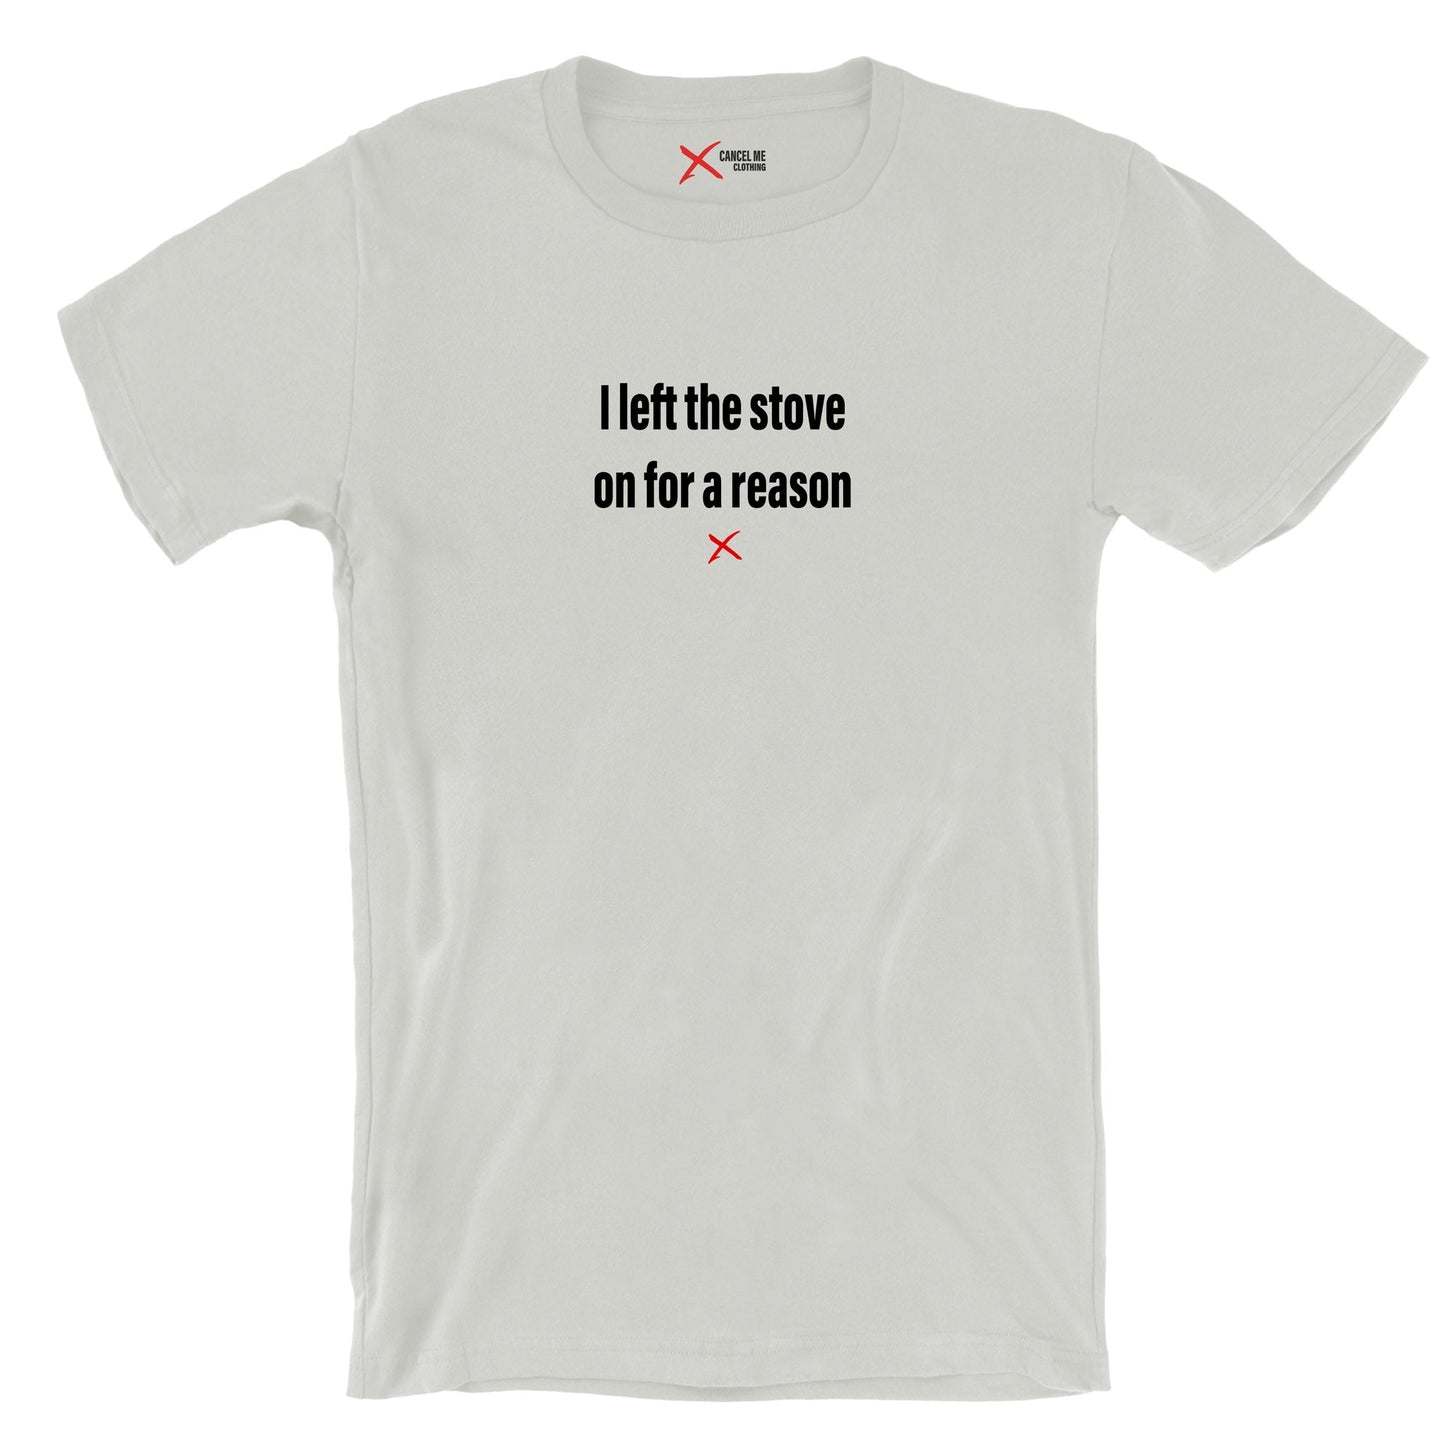 I left the stove on for a reason - Shirt